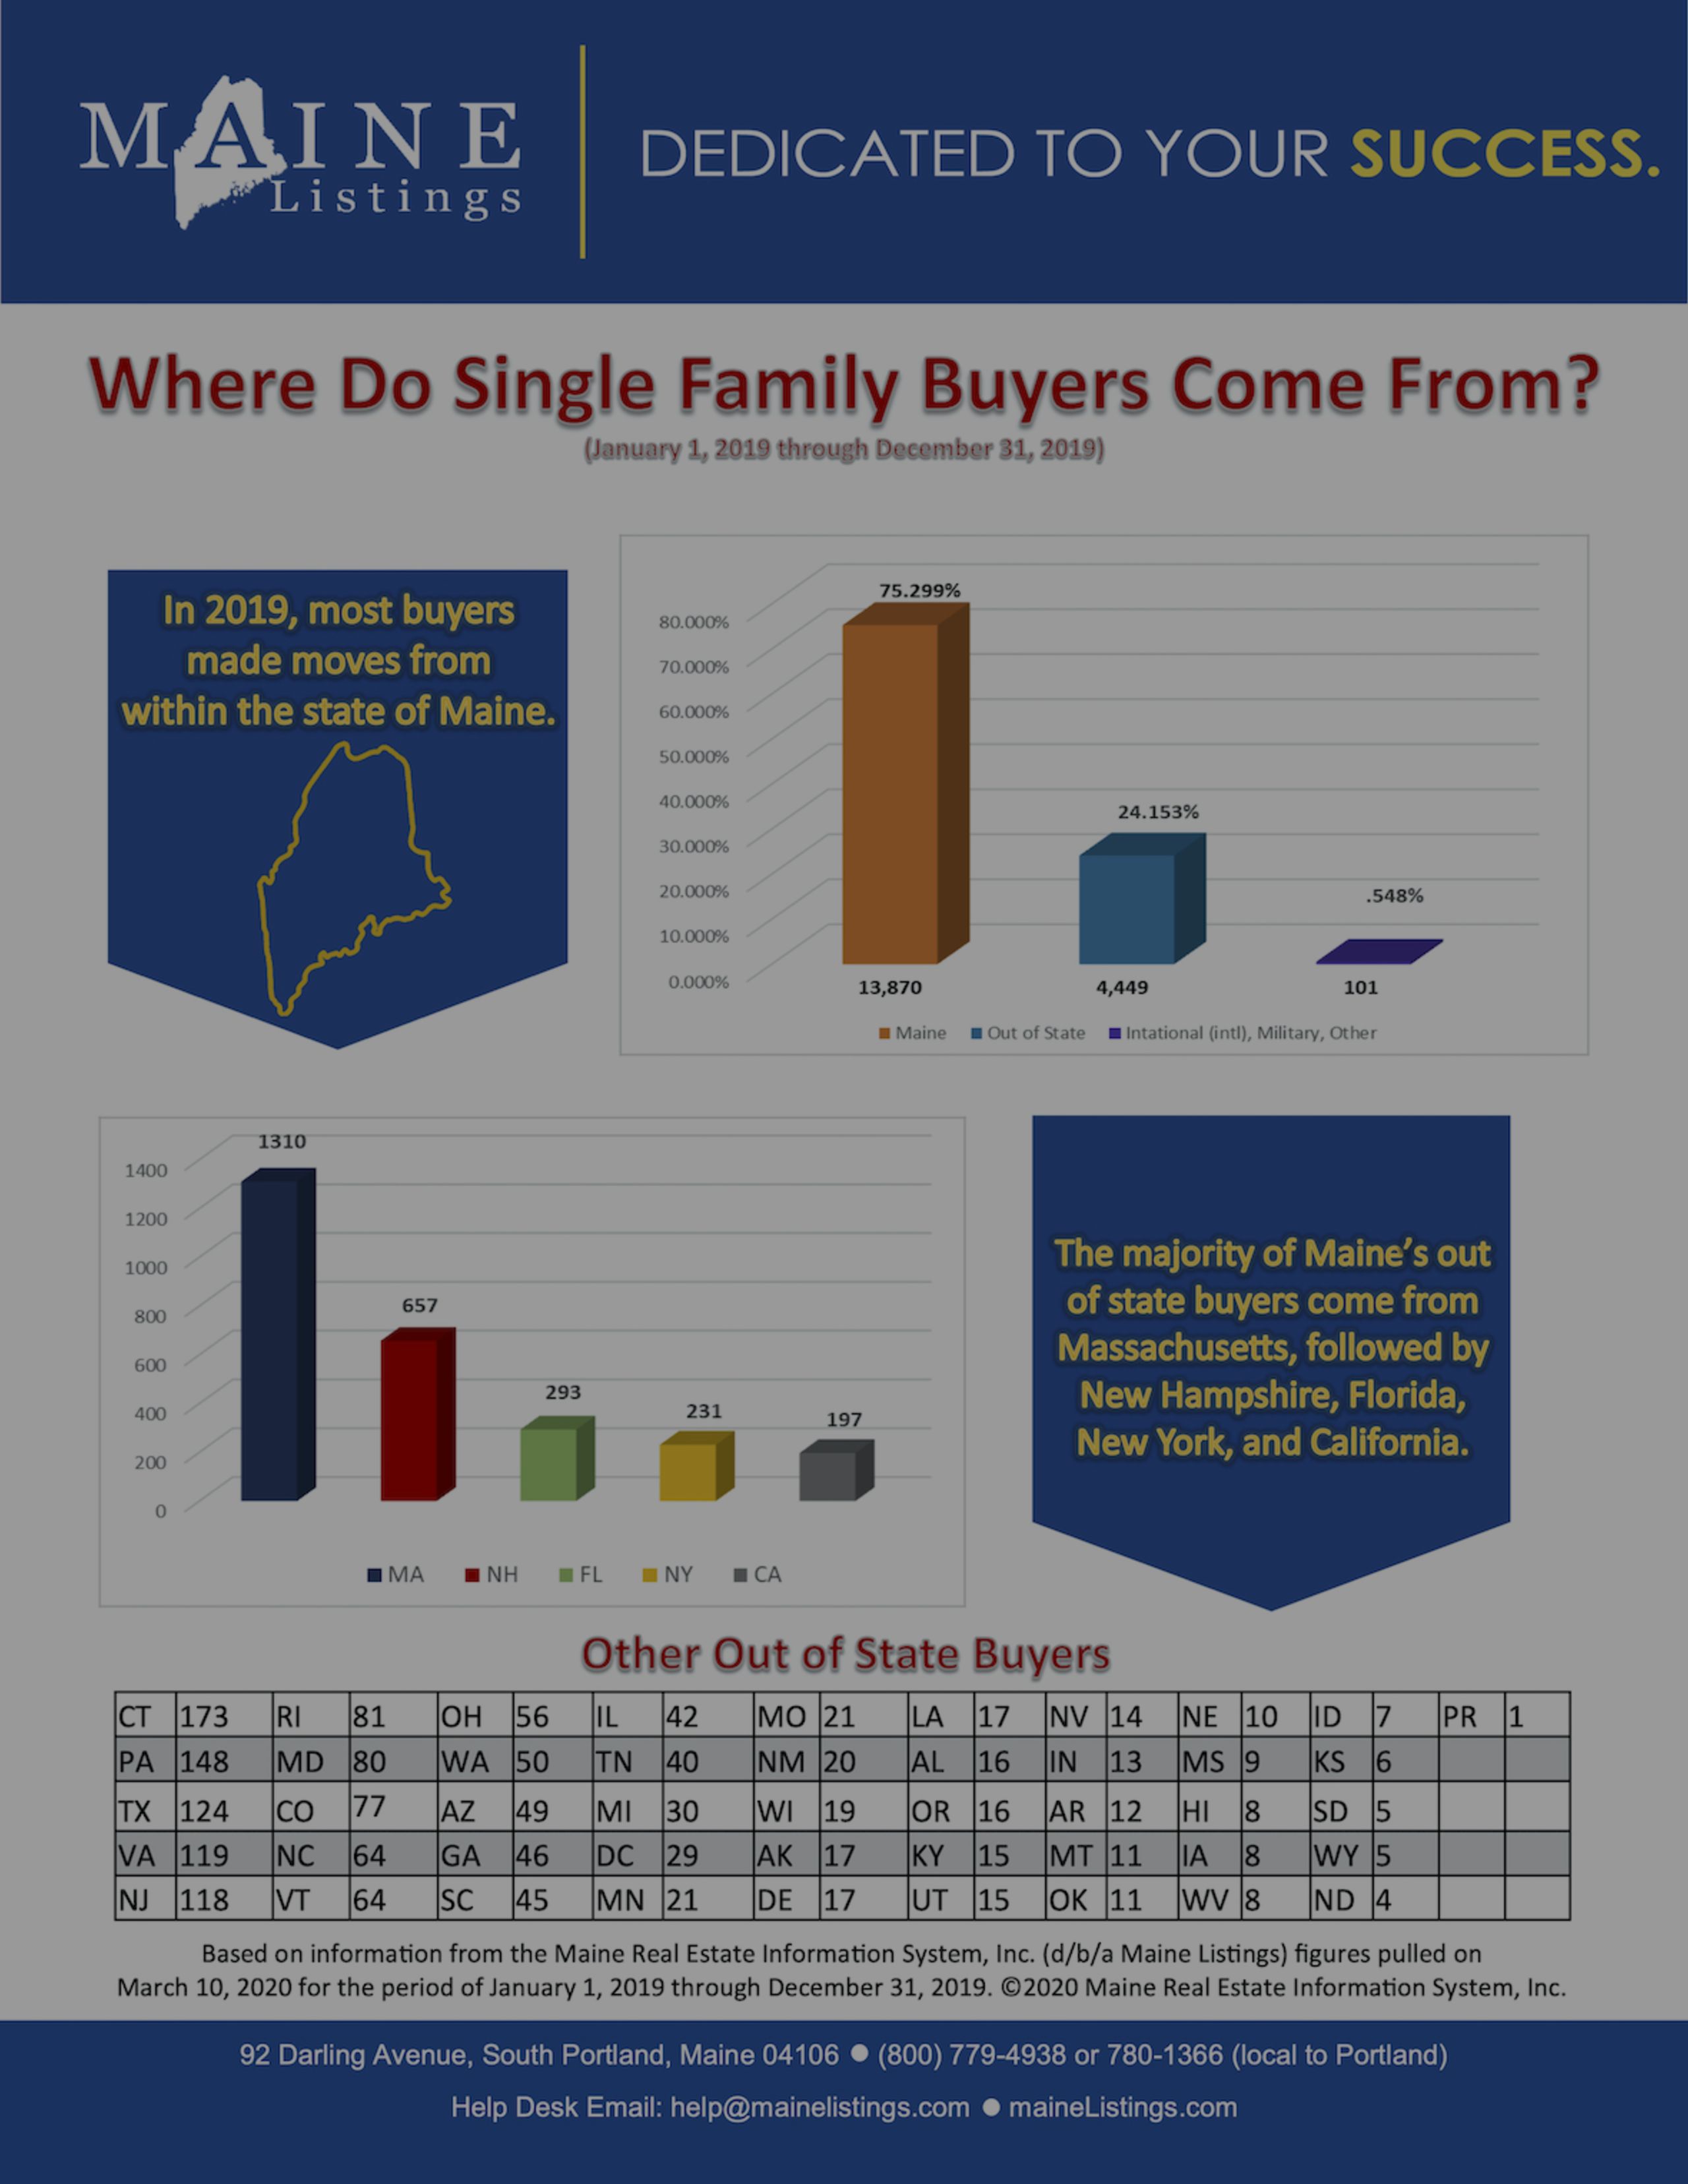 Where Do Single Family Buyers Come From?